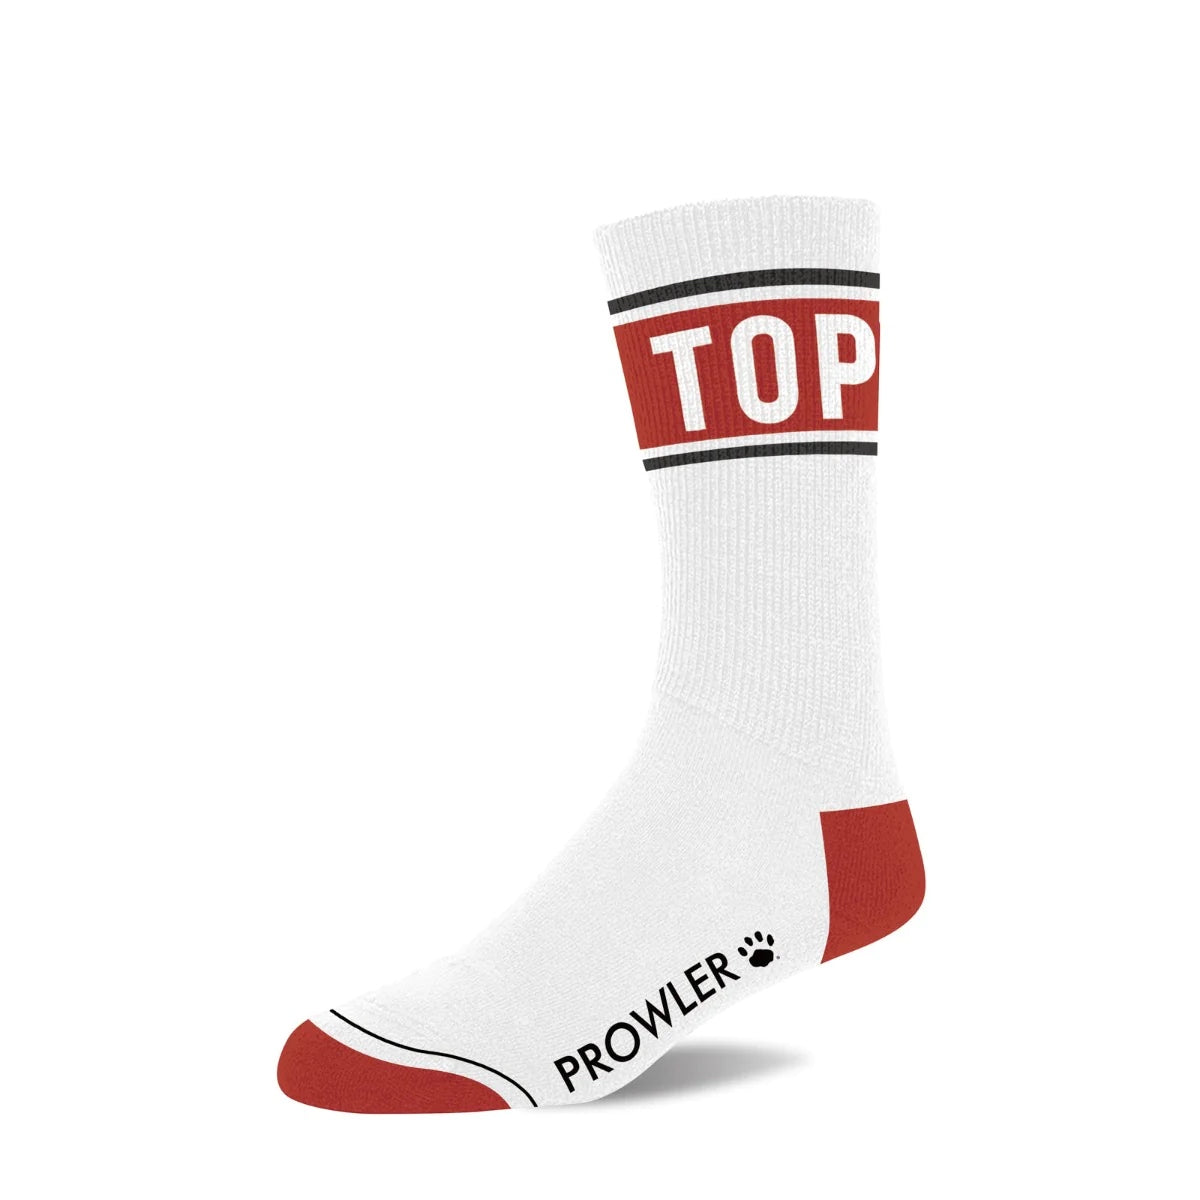 A single White & Red "Top" Prowler Text Sock.